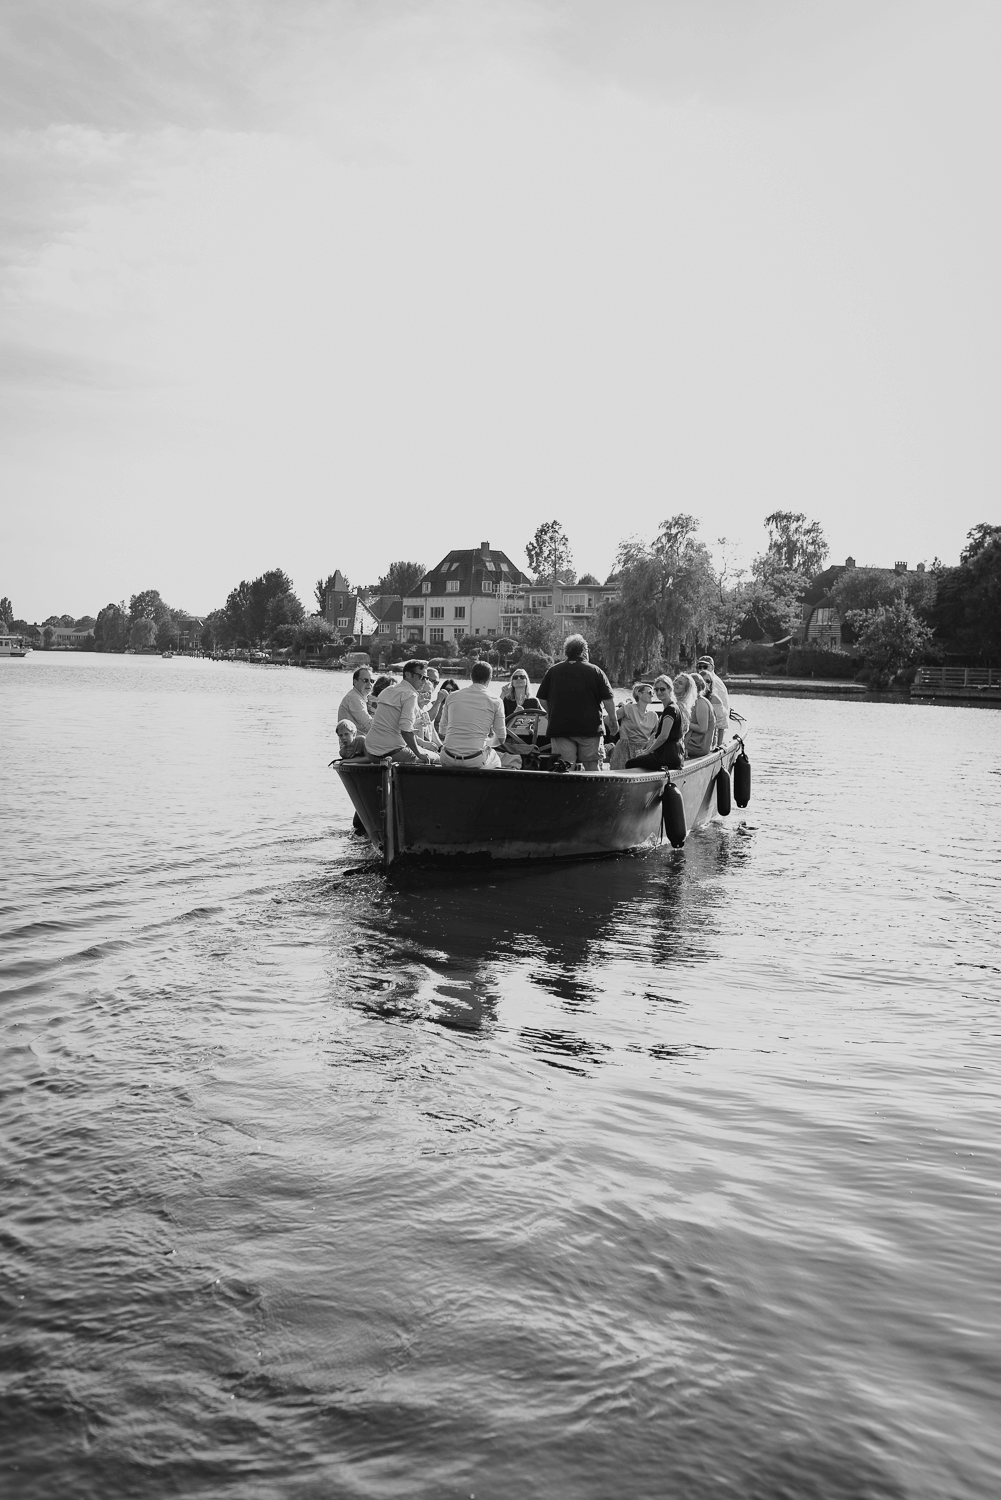 Small Wedding in Haarlem by Vicky McLachlan Photography_Wedding party on a boat on the canal in Haarlem.png